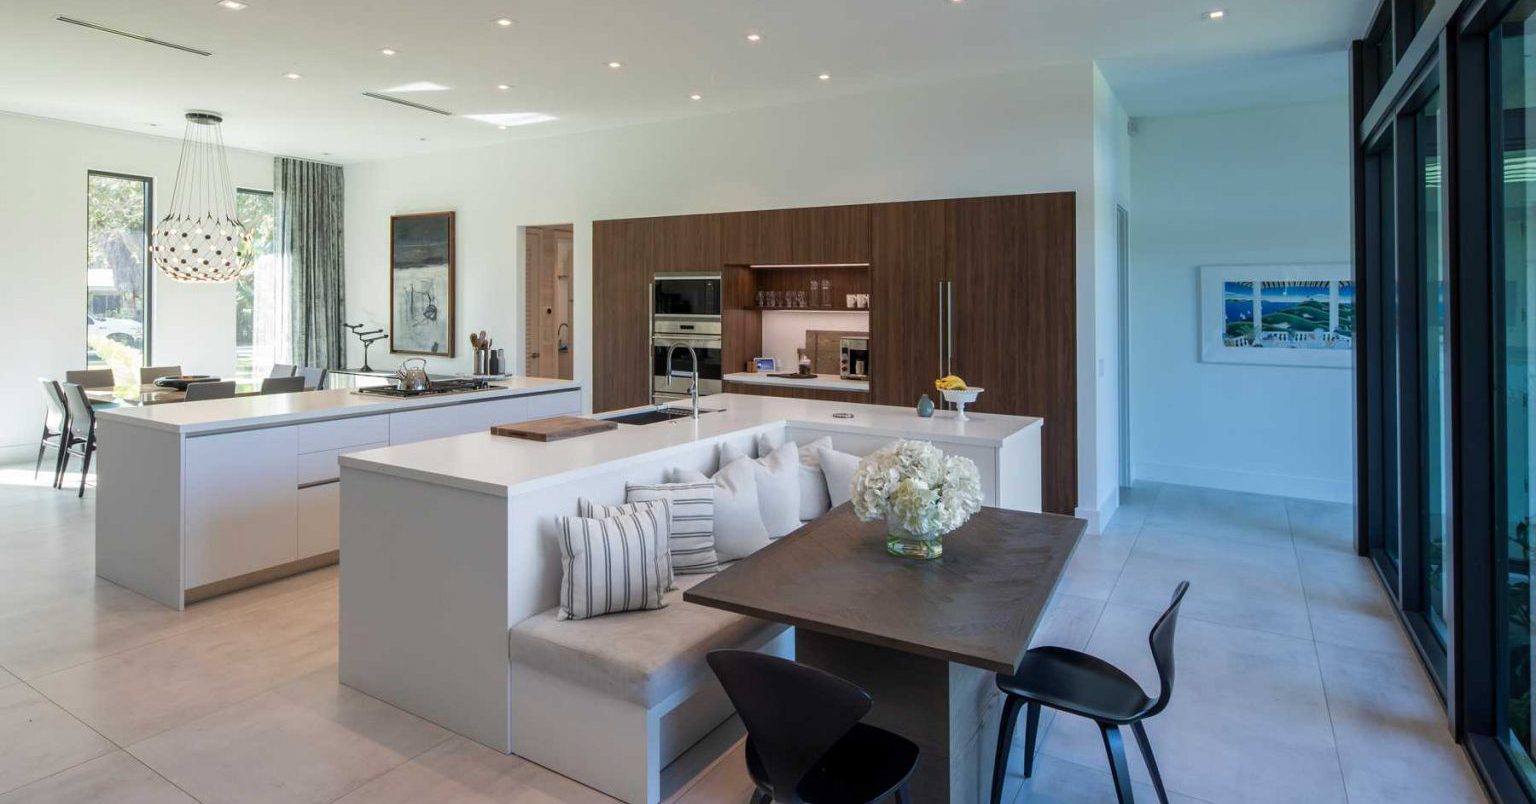 Uniquely, the beautiful house has a kitchen island design to become a place to relax